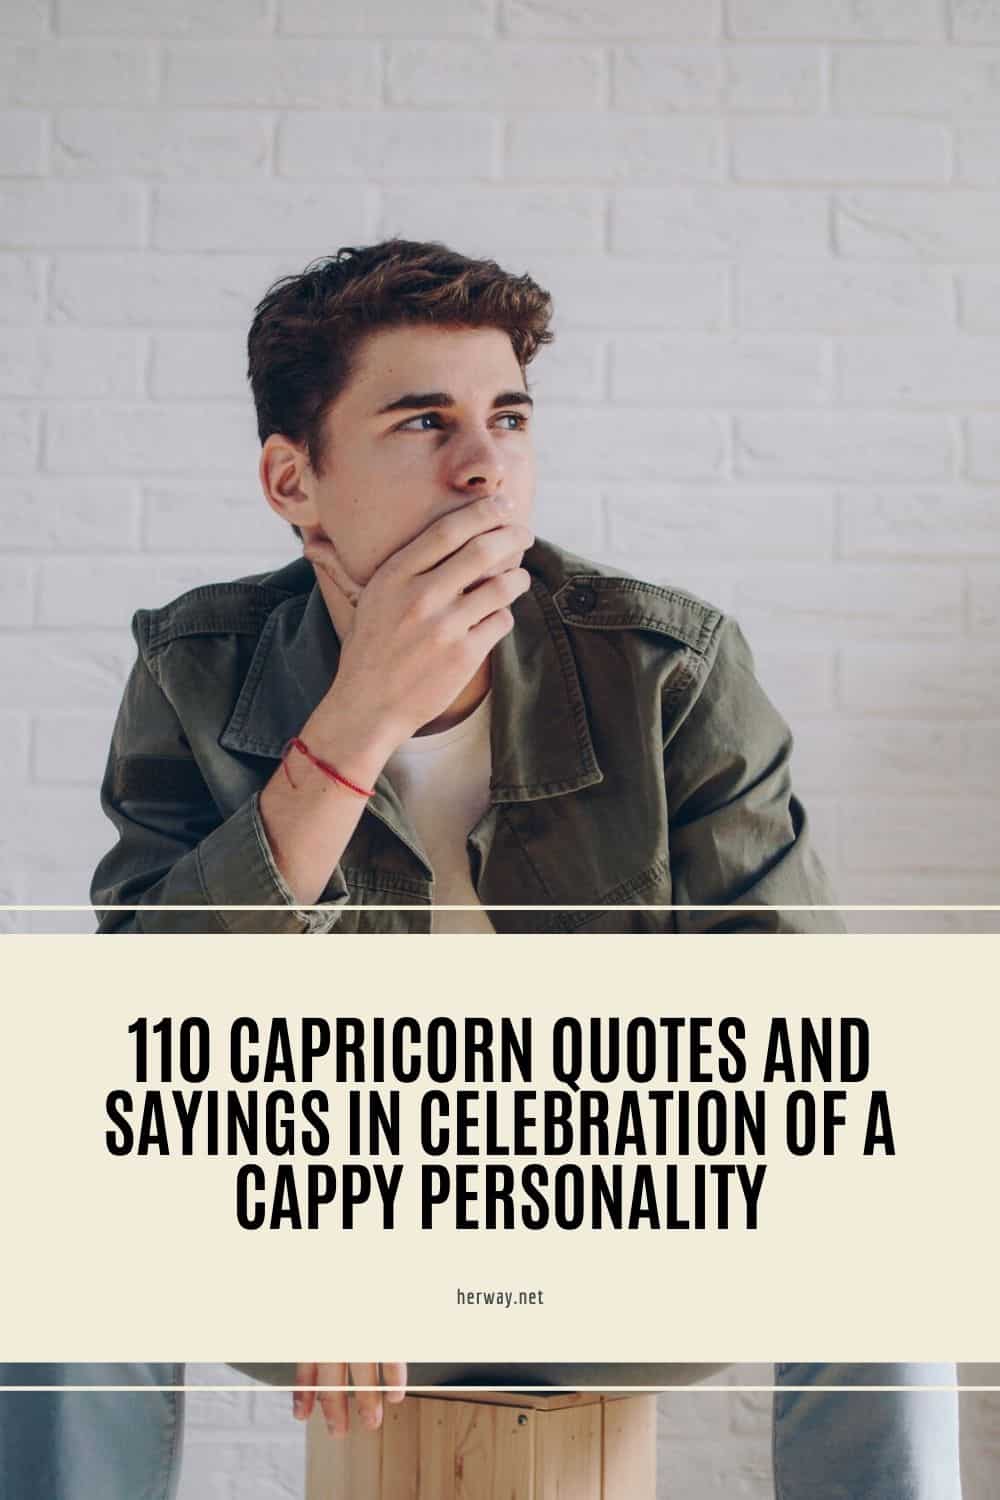 110 Capricorn Quotes And Sayings In Celebration Of A Cappy Personality